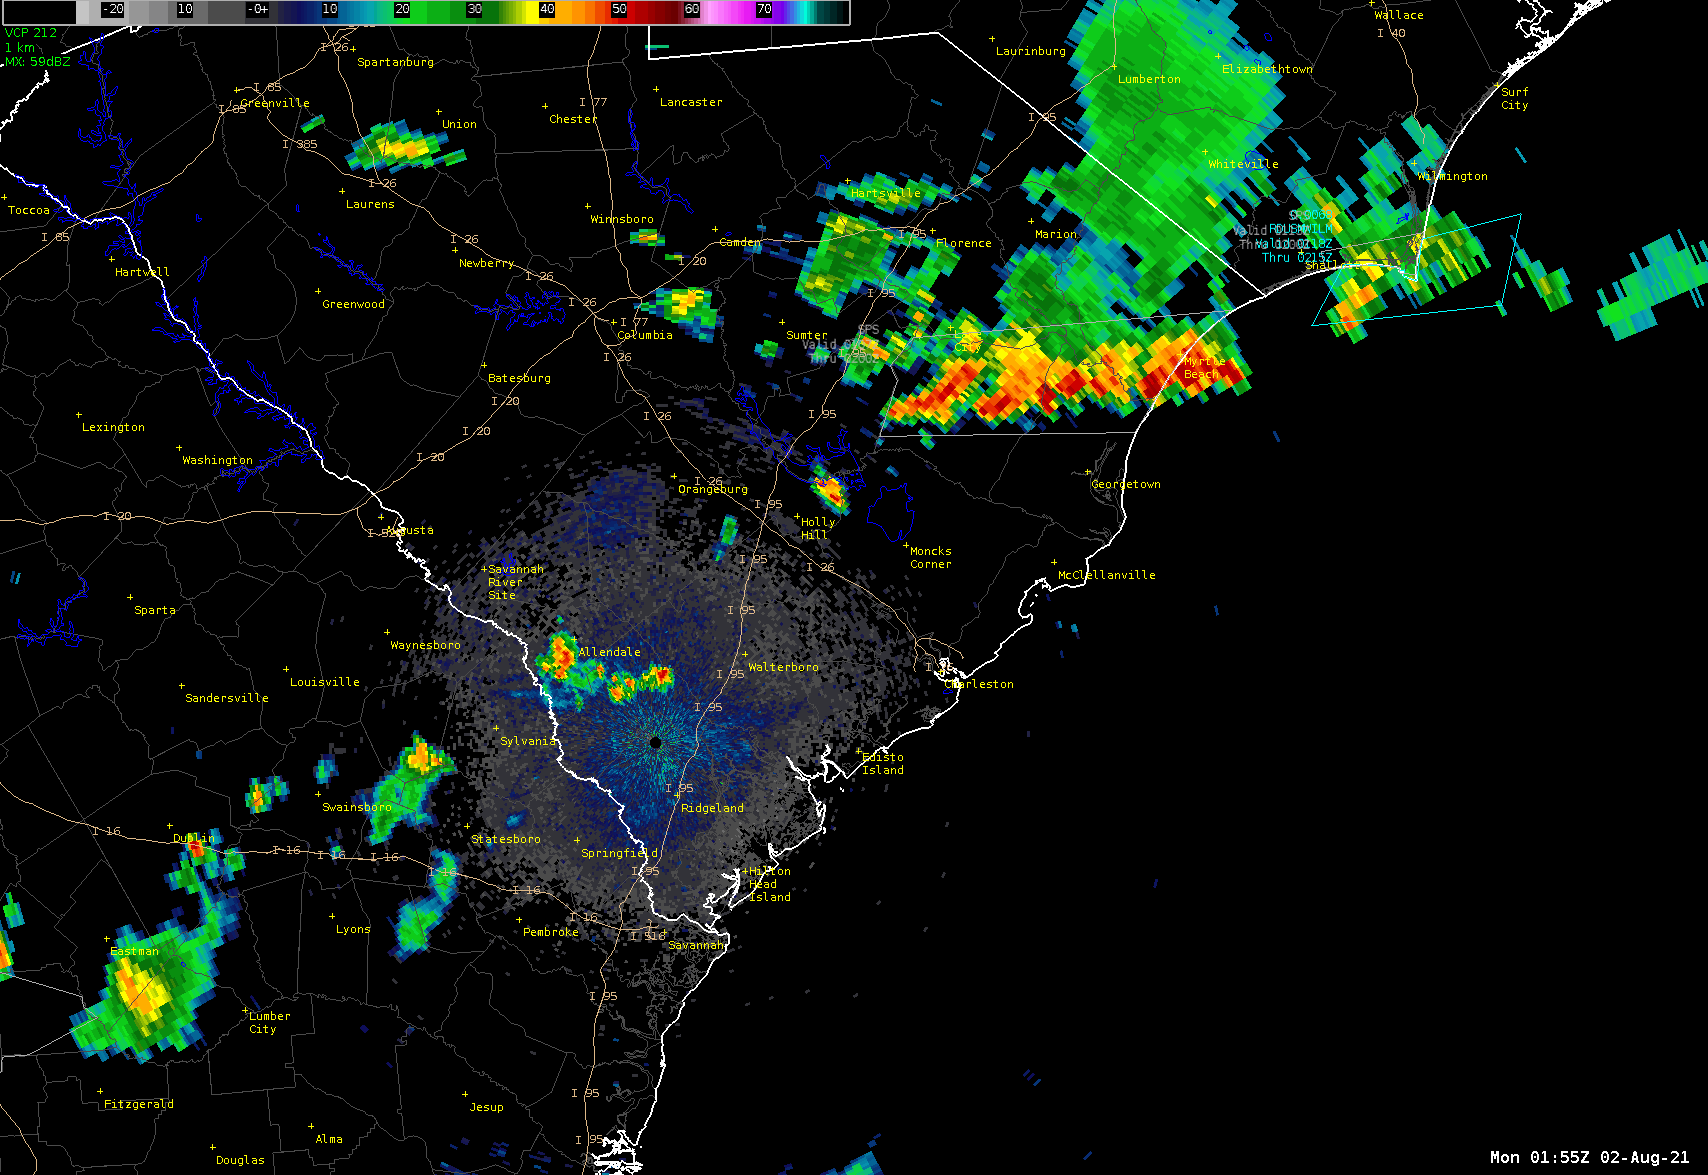 KCLX radar depicting showers and thunderstorms propagating southward.